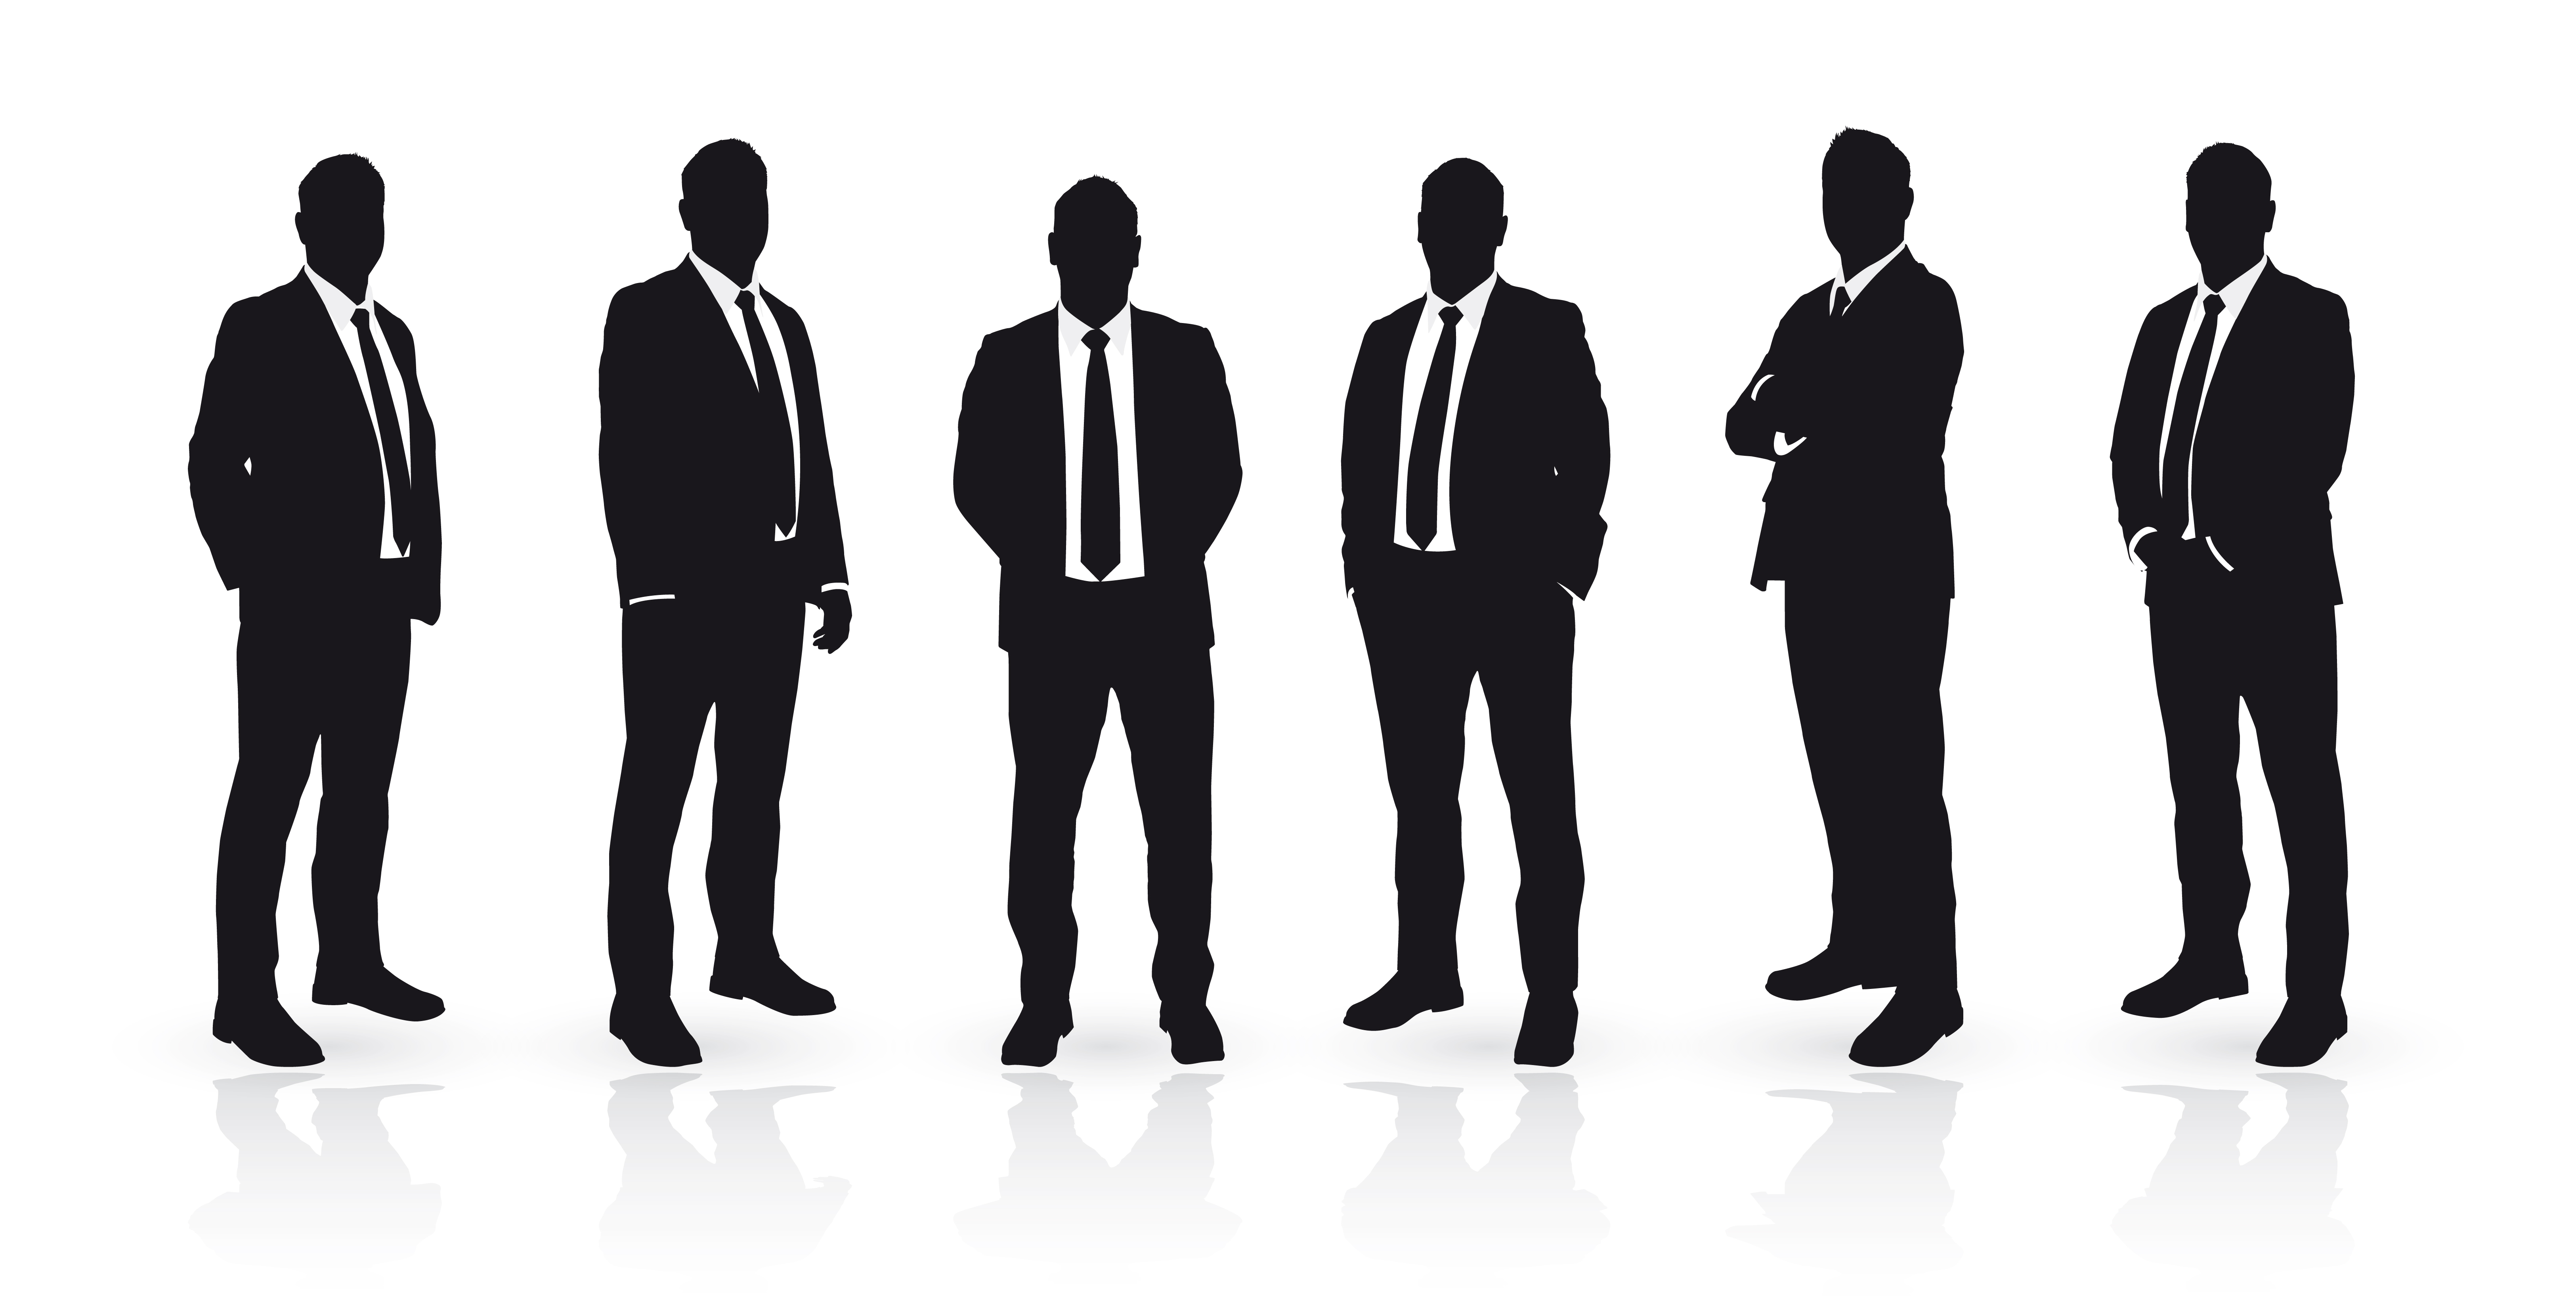 Free Management Team Cliparts, Download Free Clip Art, Free.